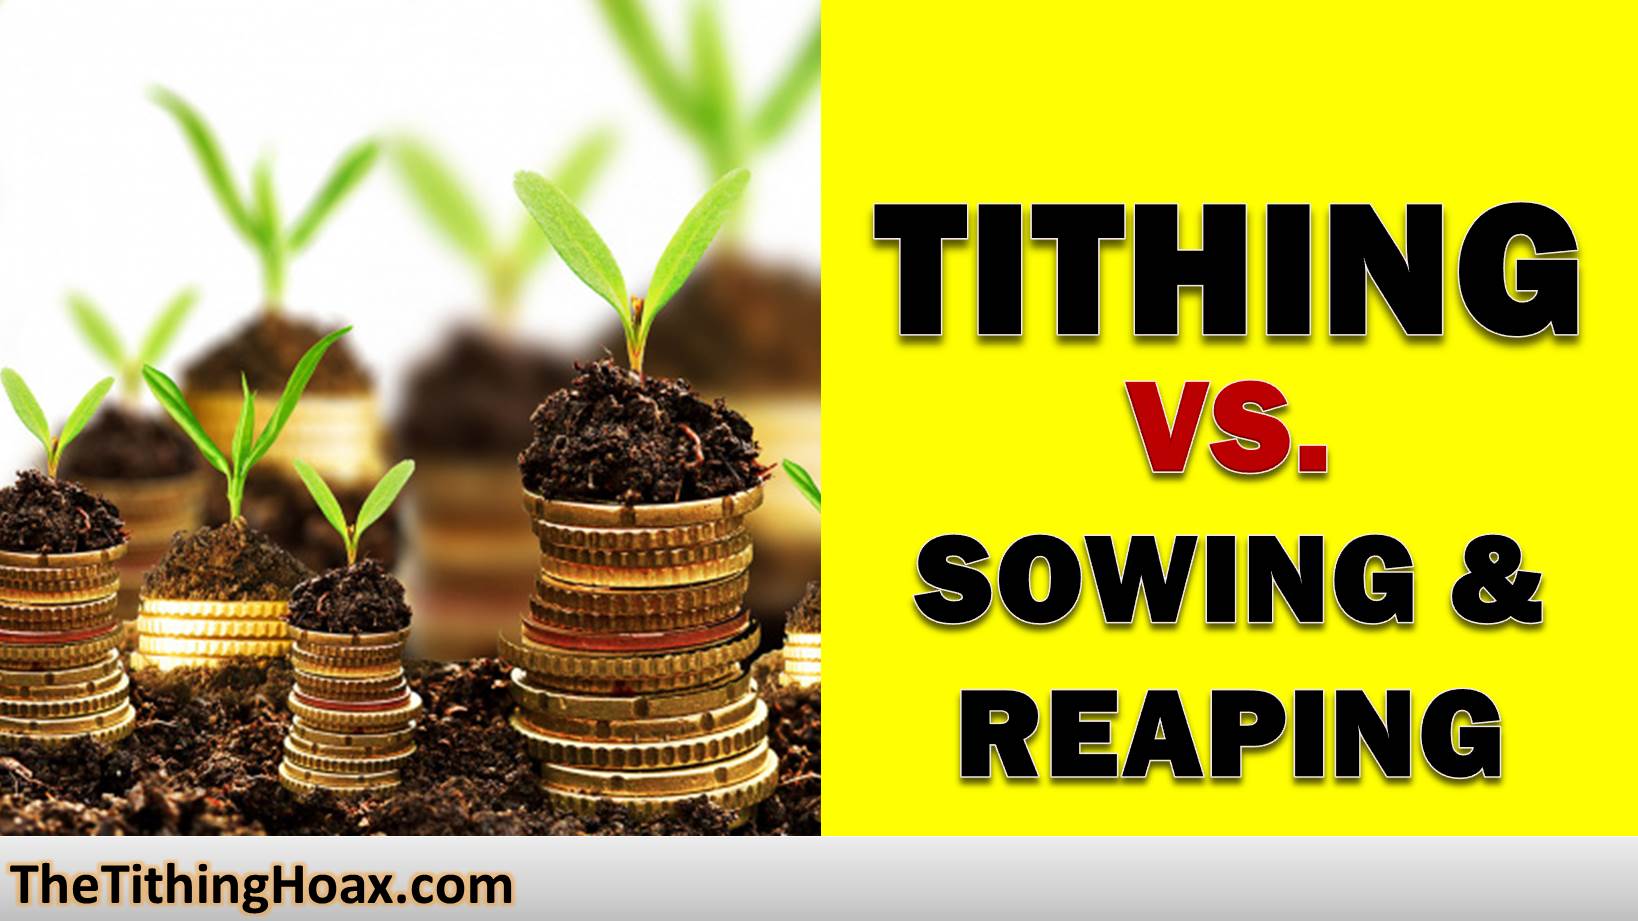 Are Tithing and Sowing Seeds the Same?